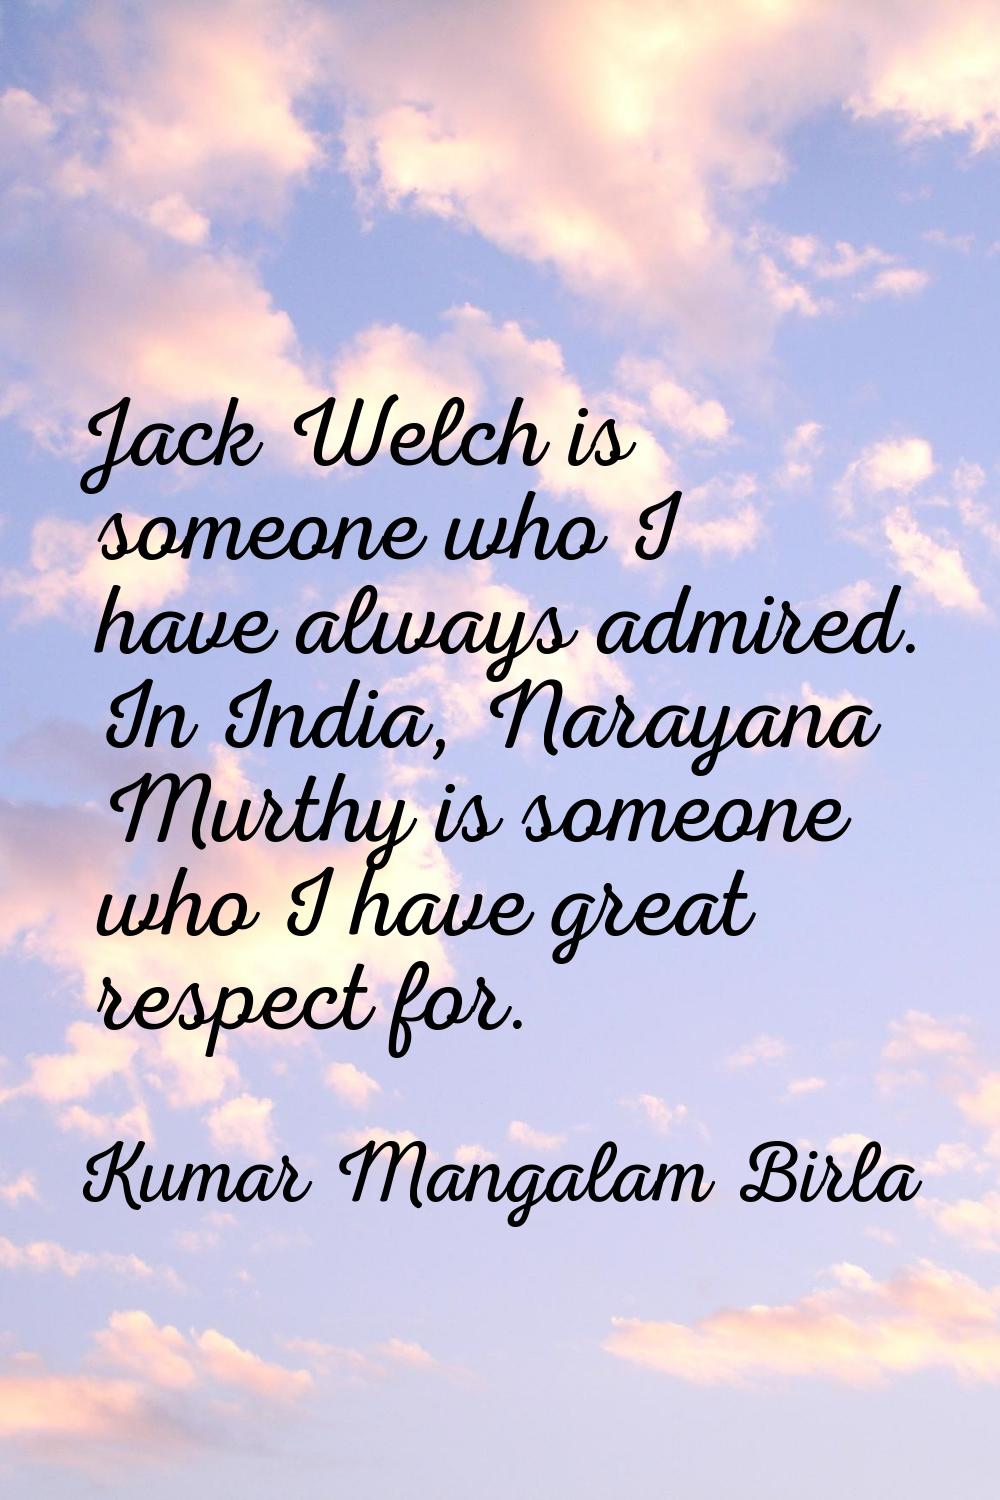 Jack Welch is someone who I have always admired. In India, Narayana Murthy is someone who I have gr